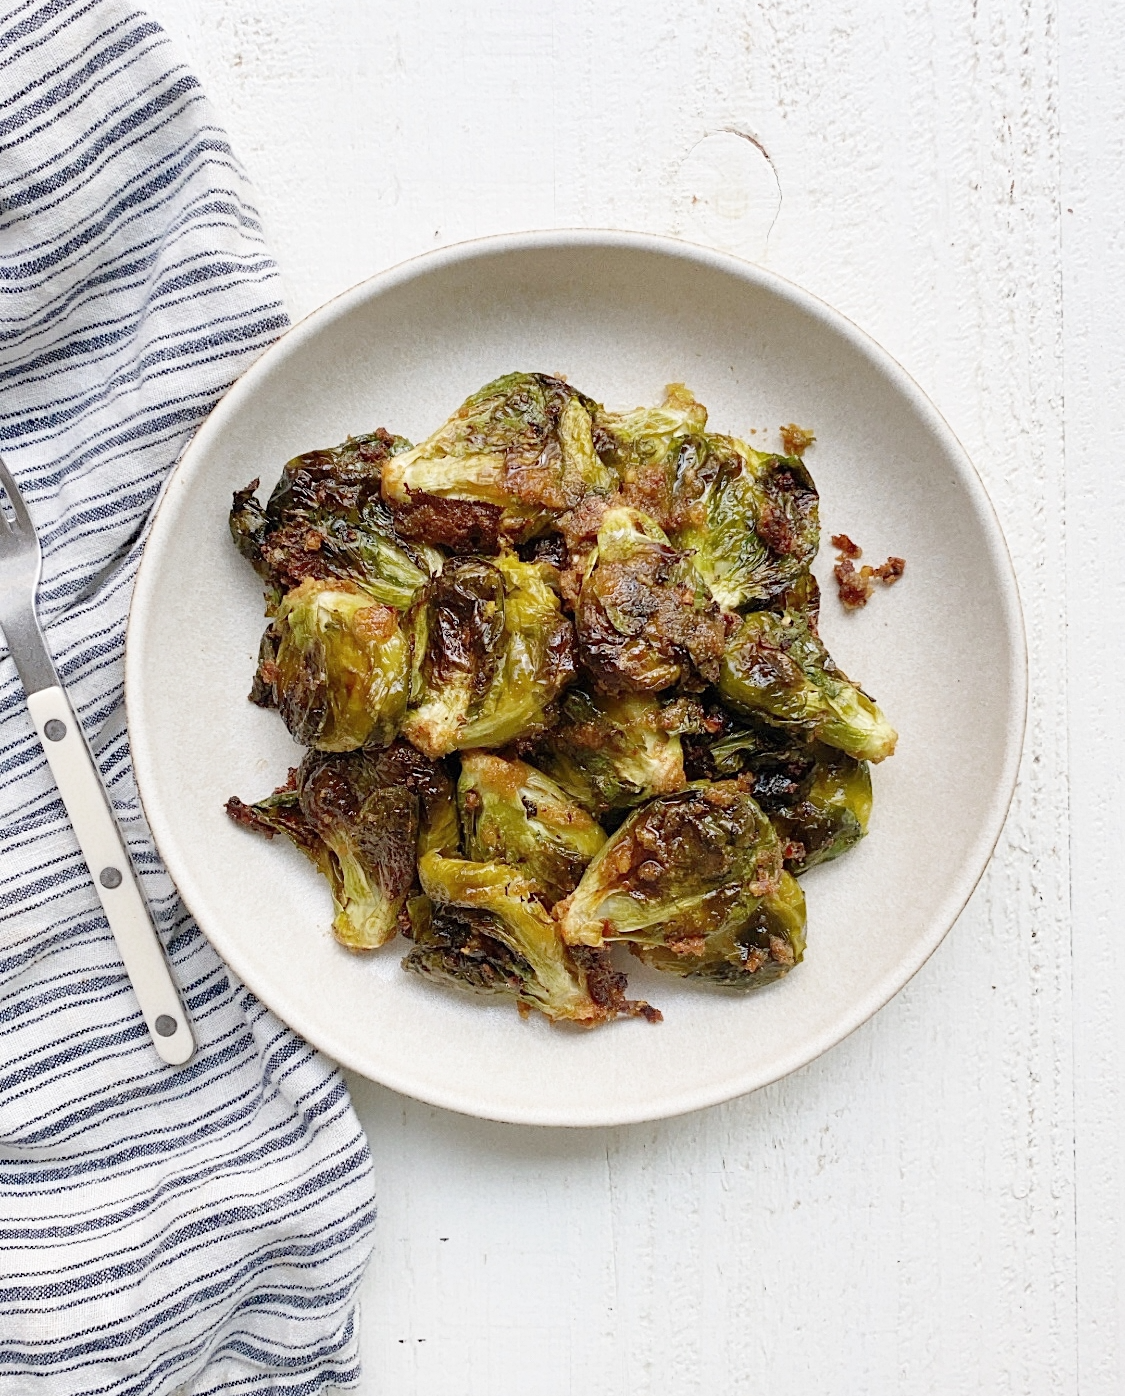 Chili Garlic Brussels Sprouts Recipe